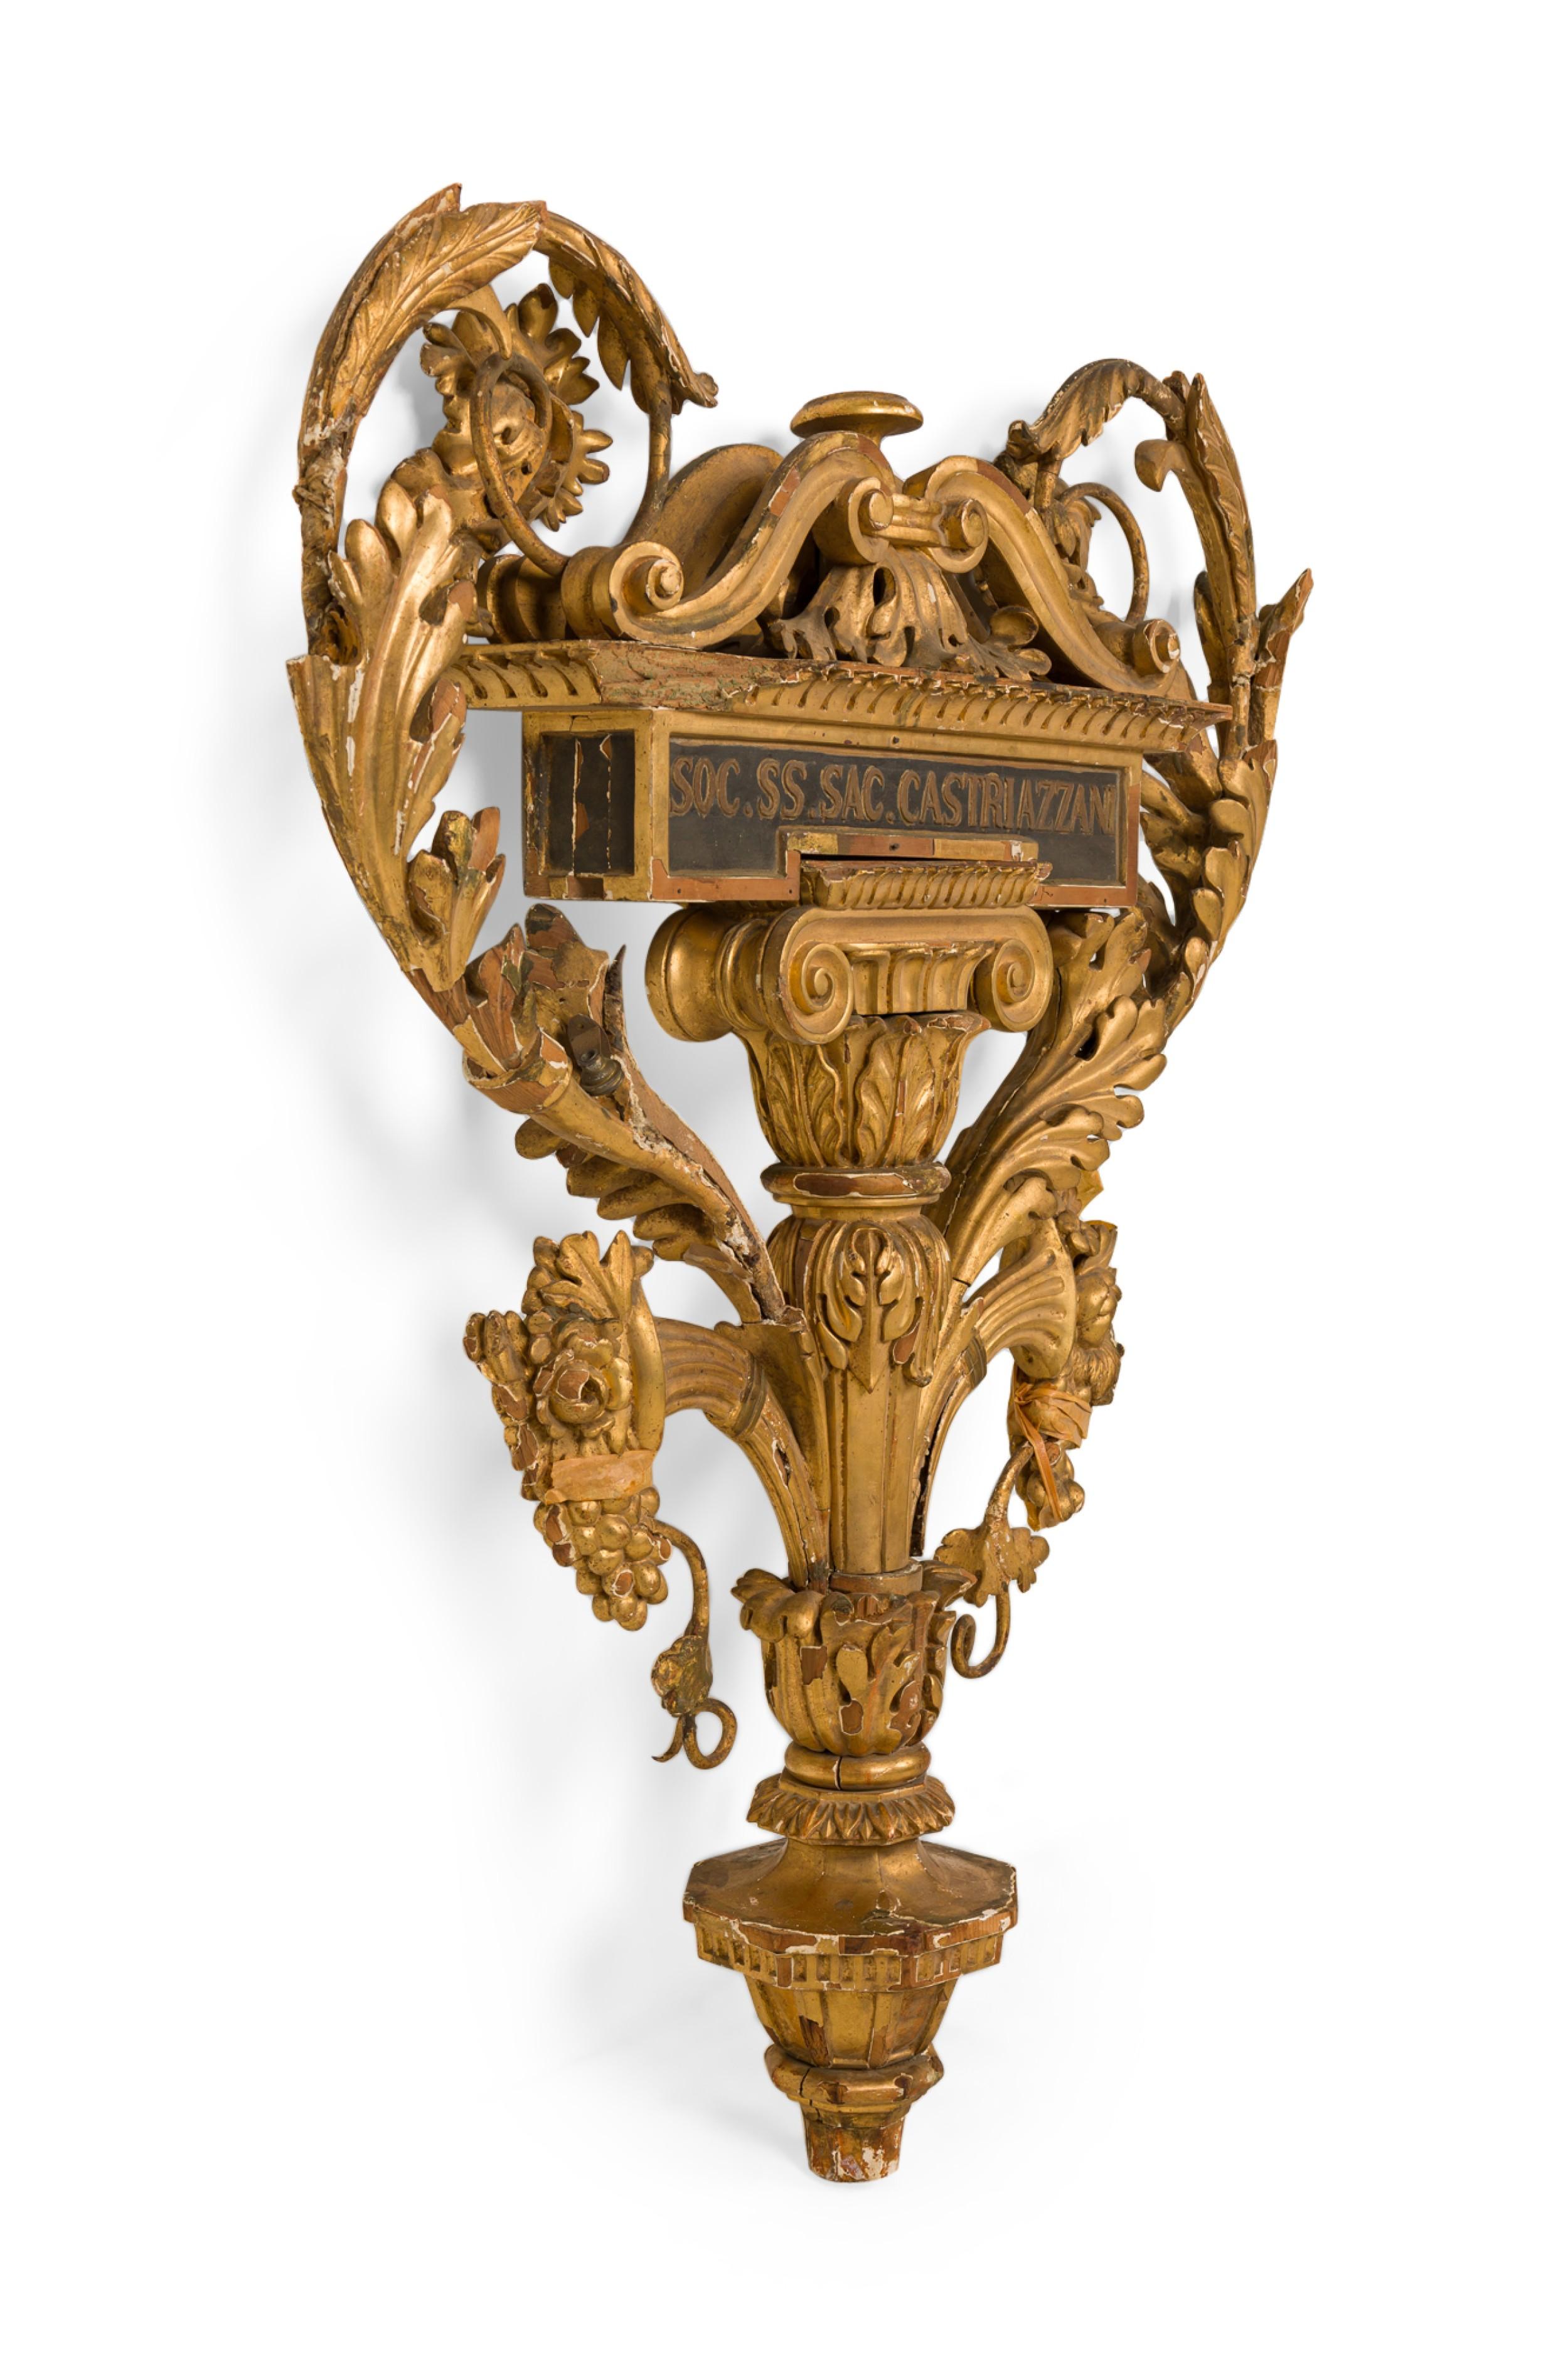 Neoclassical Italian Neoclassic Wall Plaque of Gilt Urn For Sale